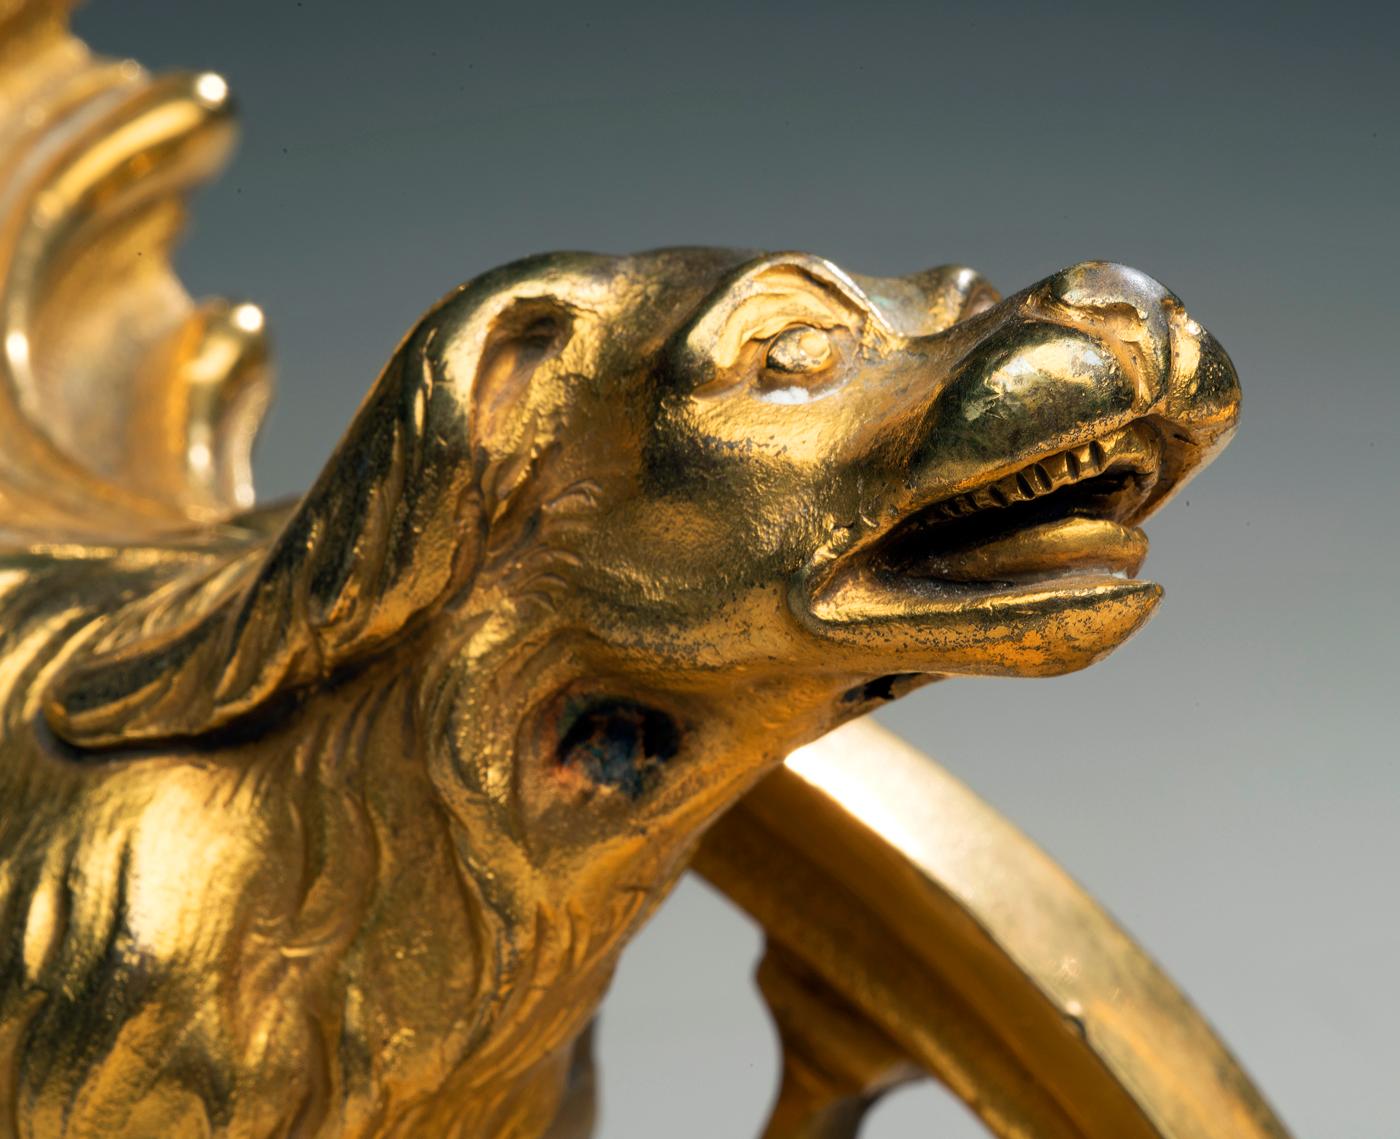 Louis XV-Style Gilt Bronze Chenets With a Poodle and a Hound - a Pair
France, 19th century 
Gilt bronze
11 x 4 x 10 inches

Chenets, also referred to as fire dogs and andirons, are metal supports for logs in the fireplace, usually with two feet at